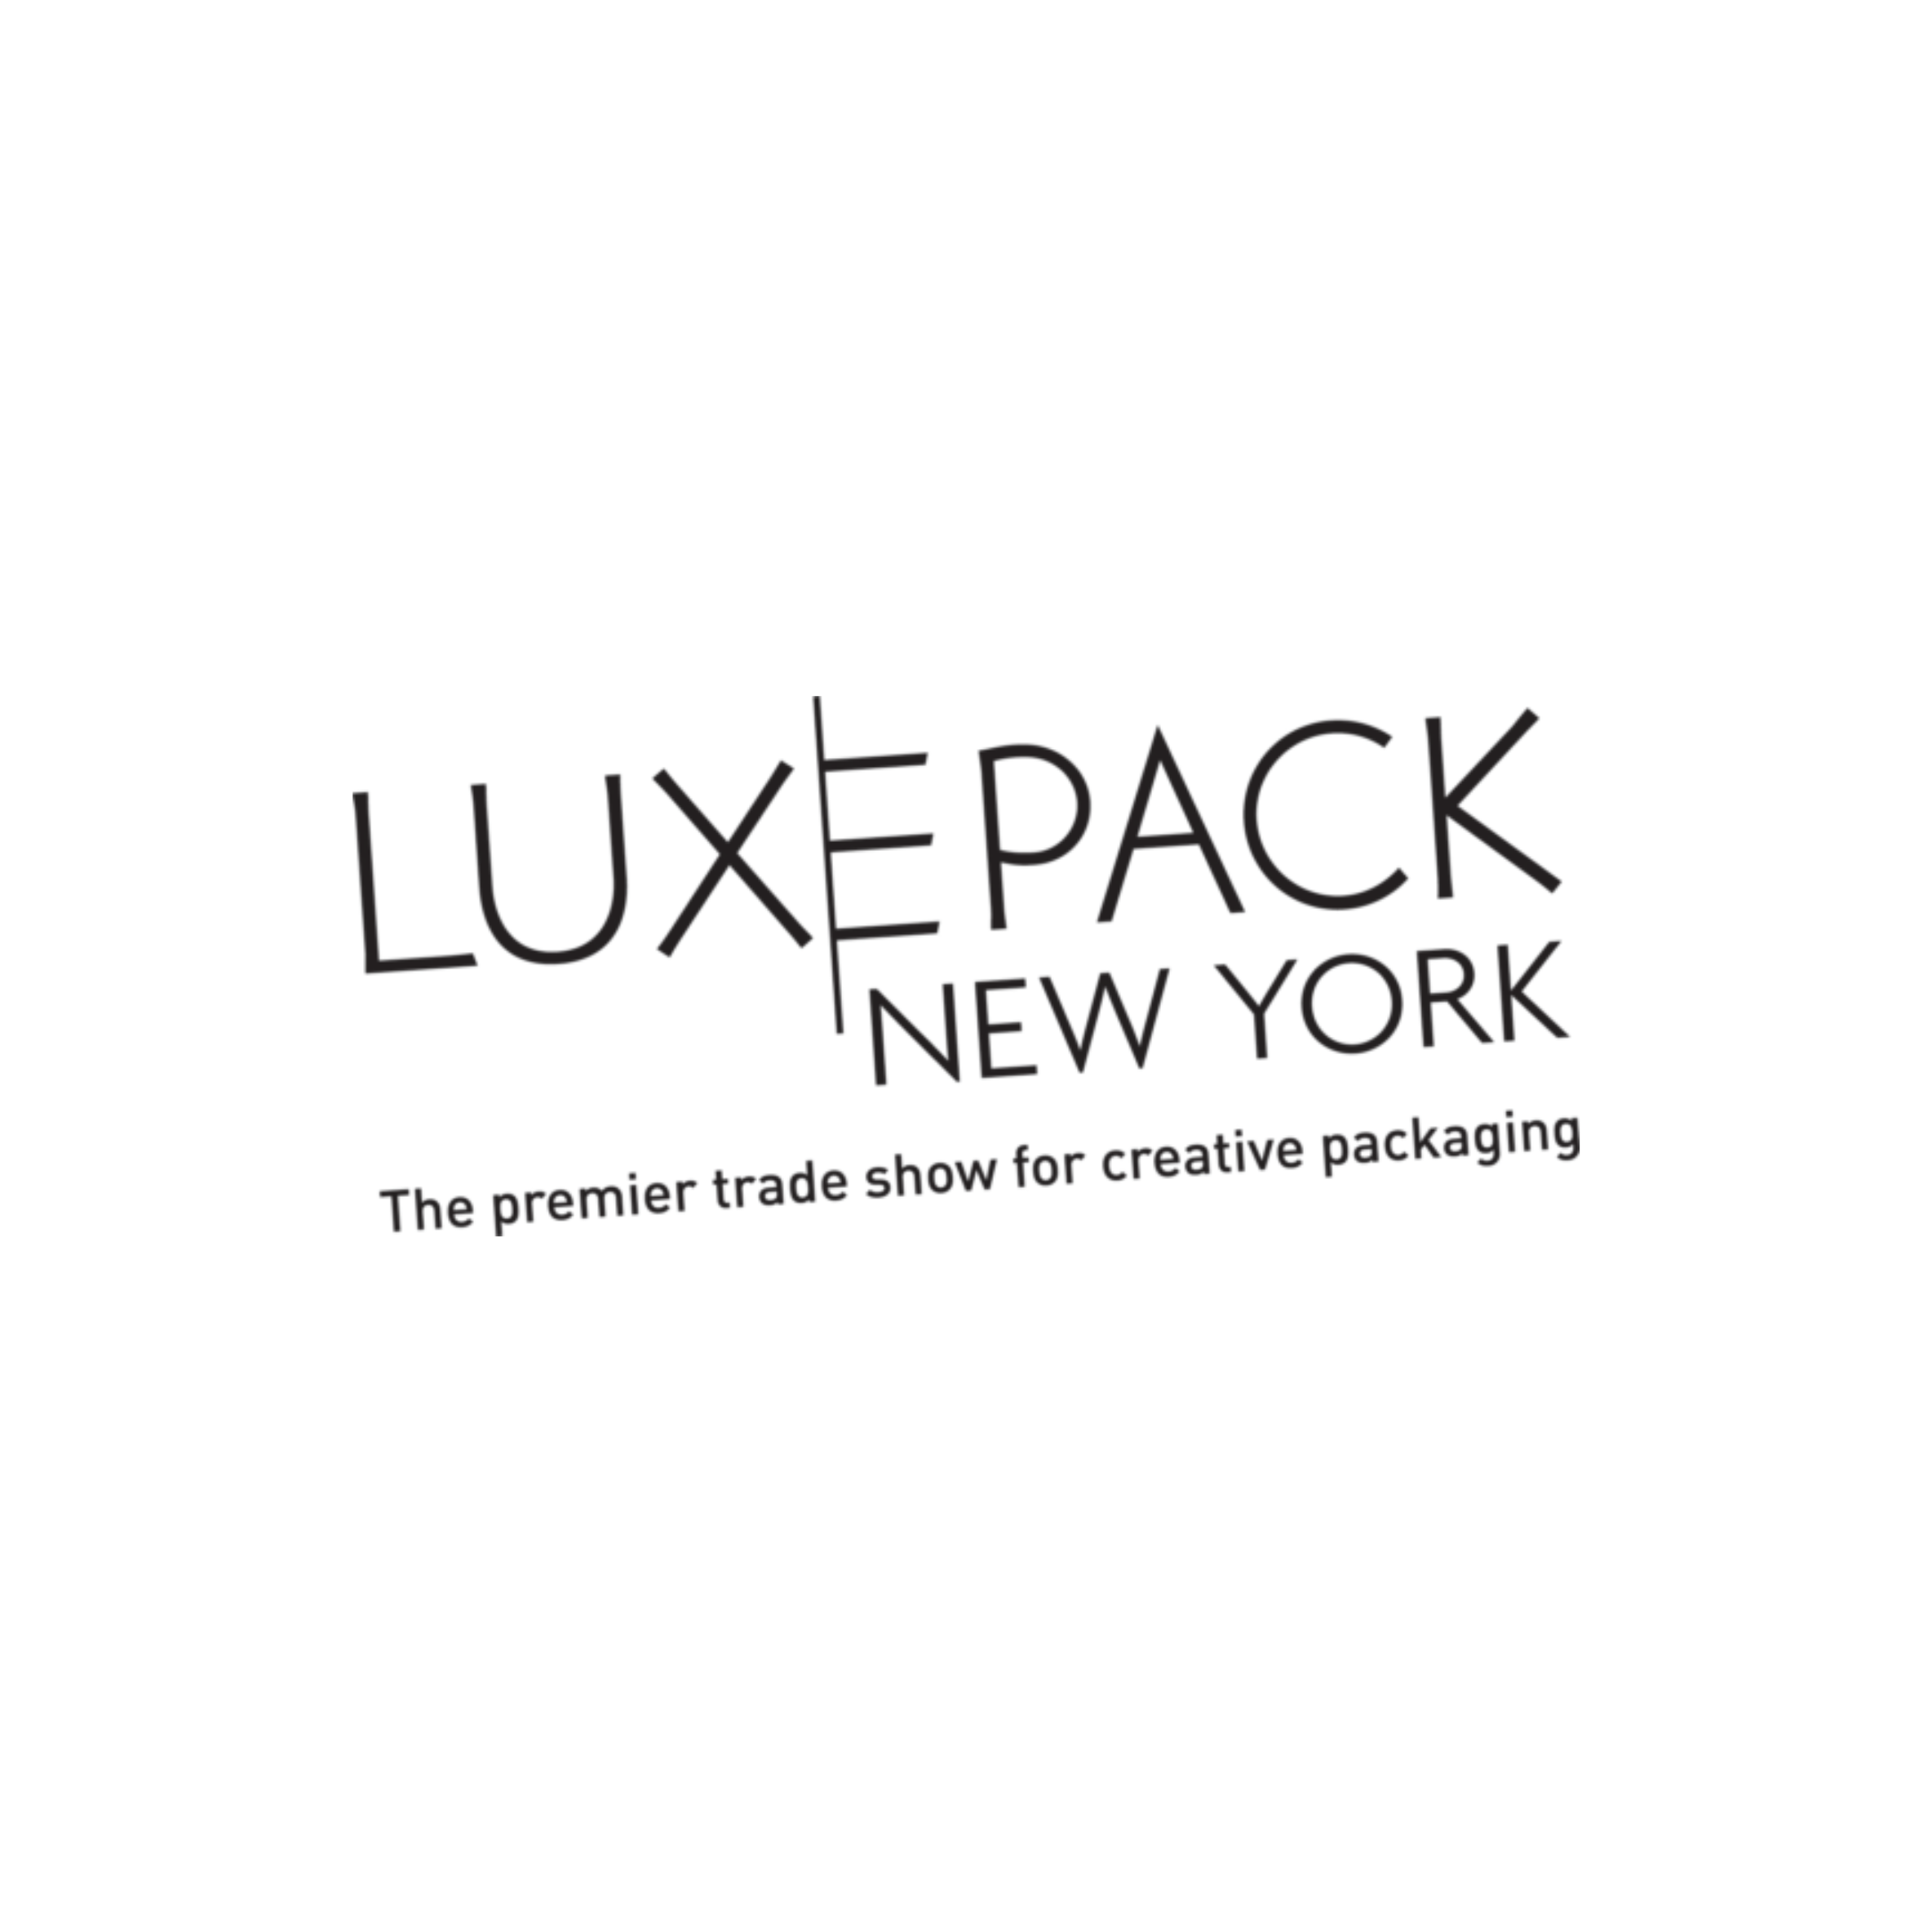 LUXE PACK New York